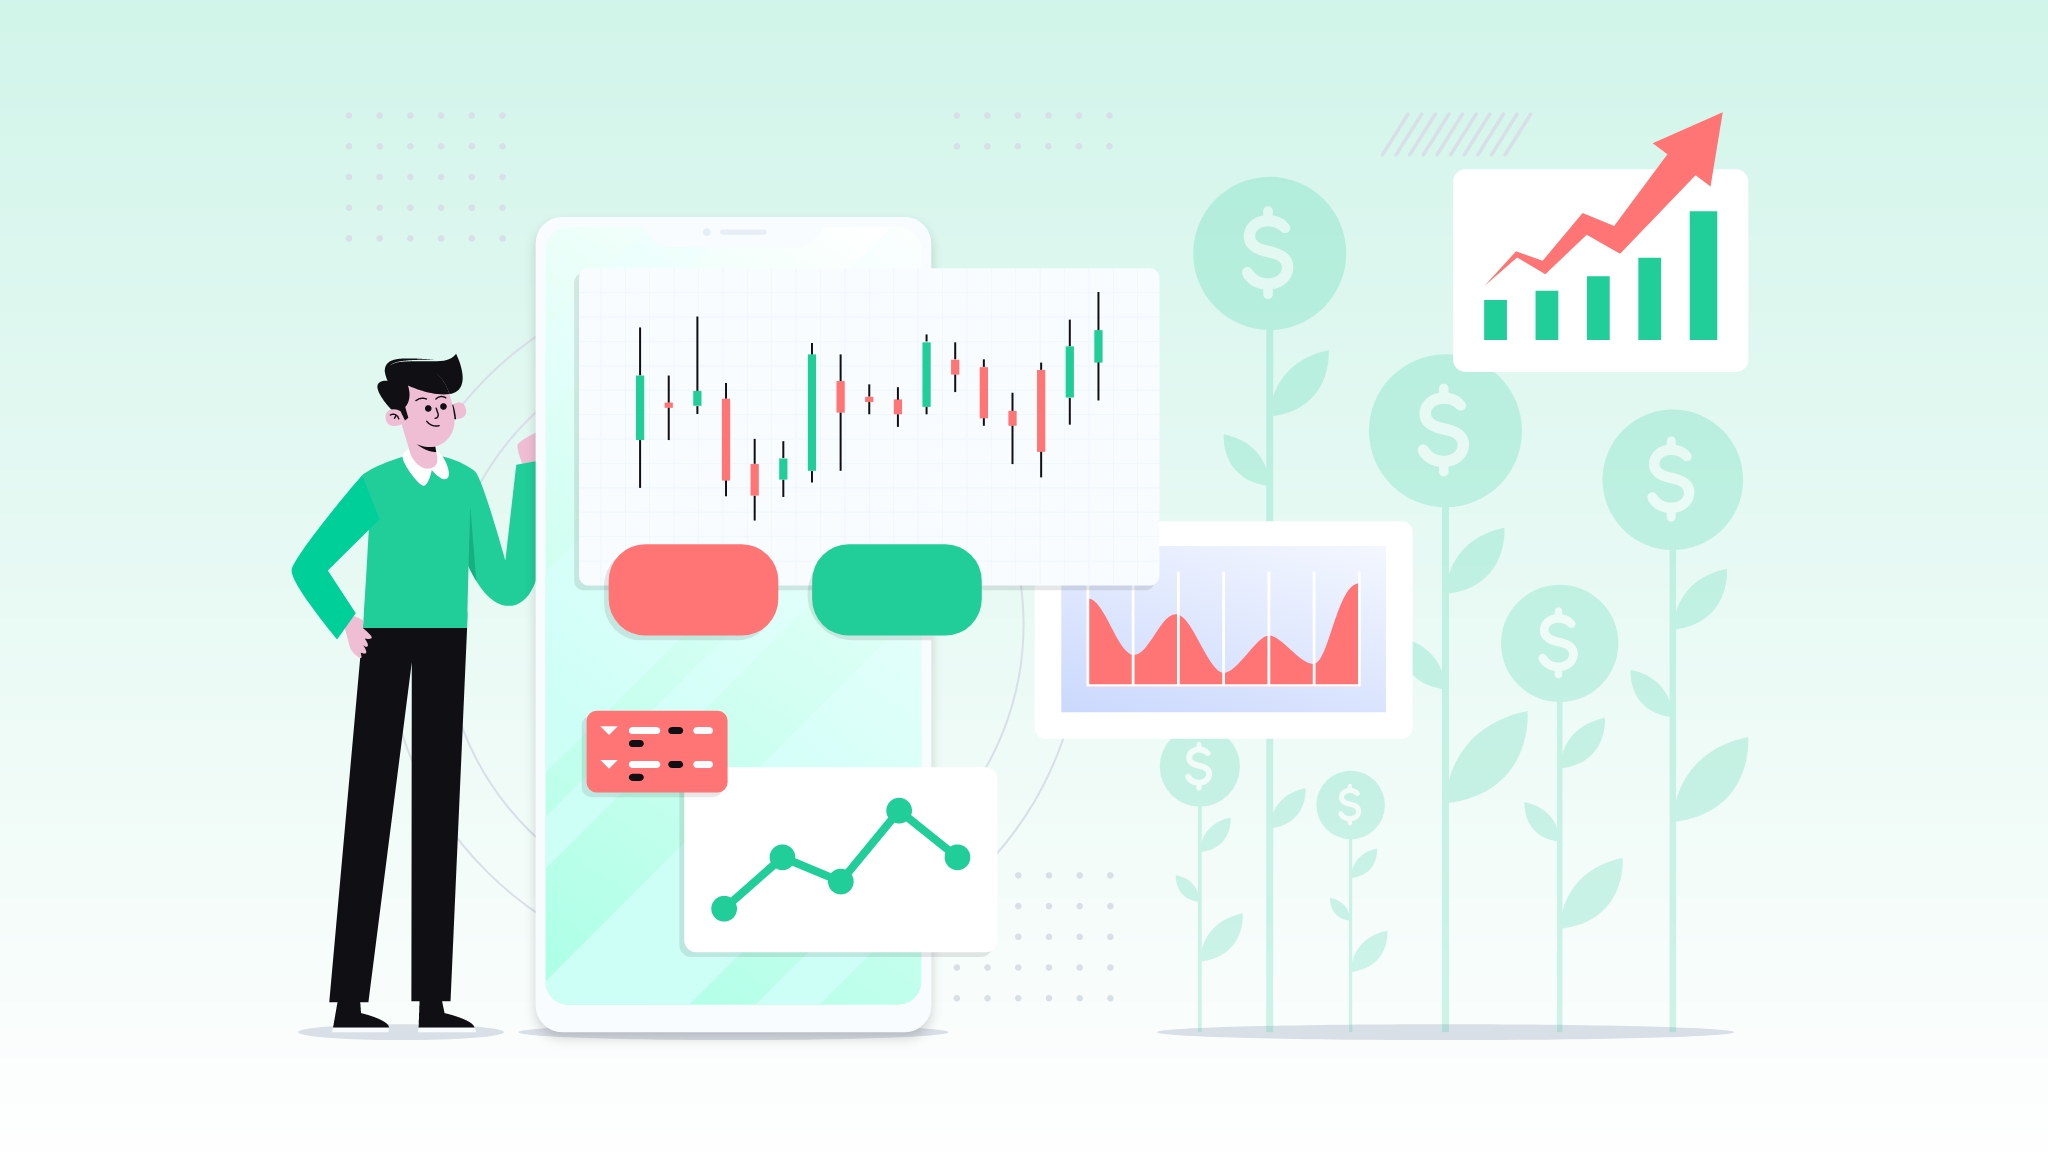 Robinhood Stock Trading App: Business Model of Silicon Valley’s Hottest Startup Revealed